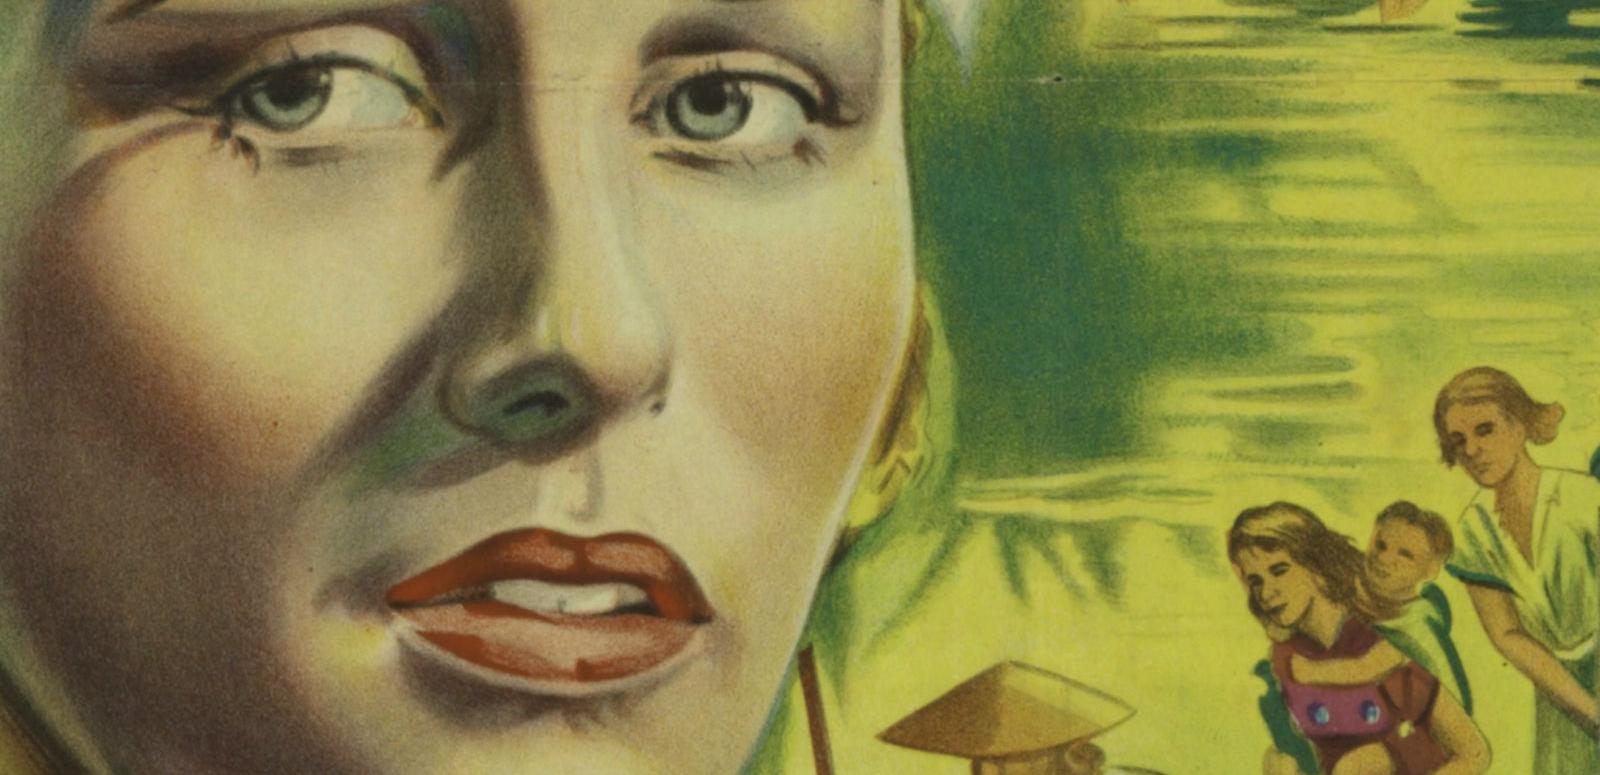 Cropped section of UK poster for A Town Like Alice showing close up of Virginia McKenna's face